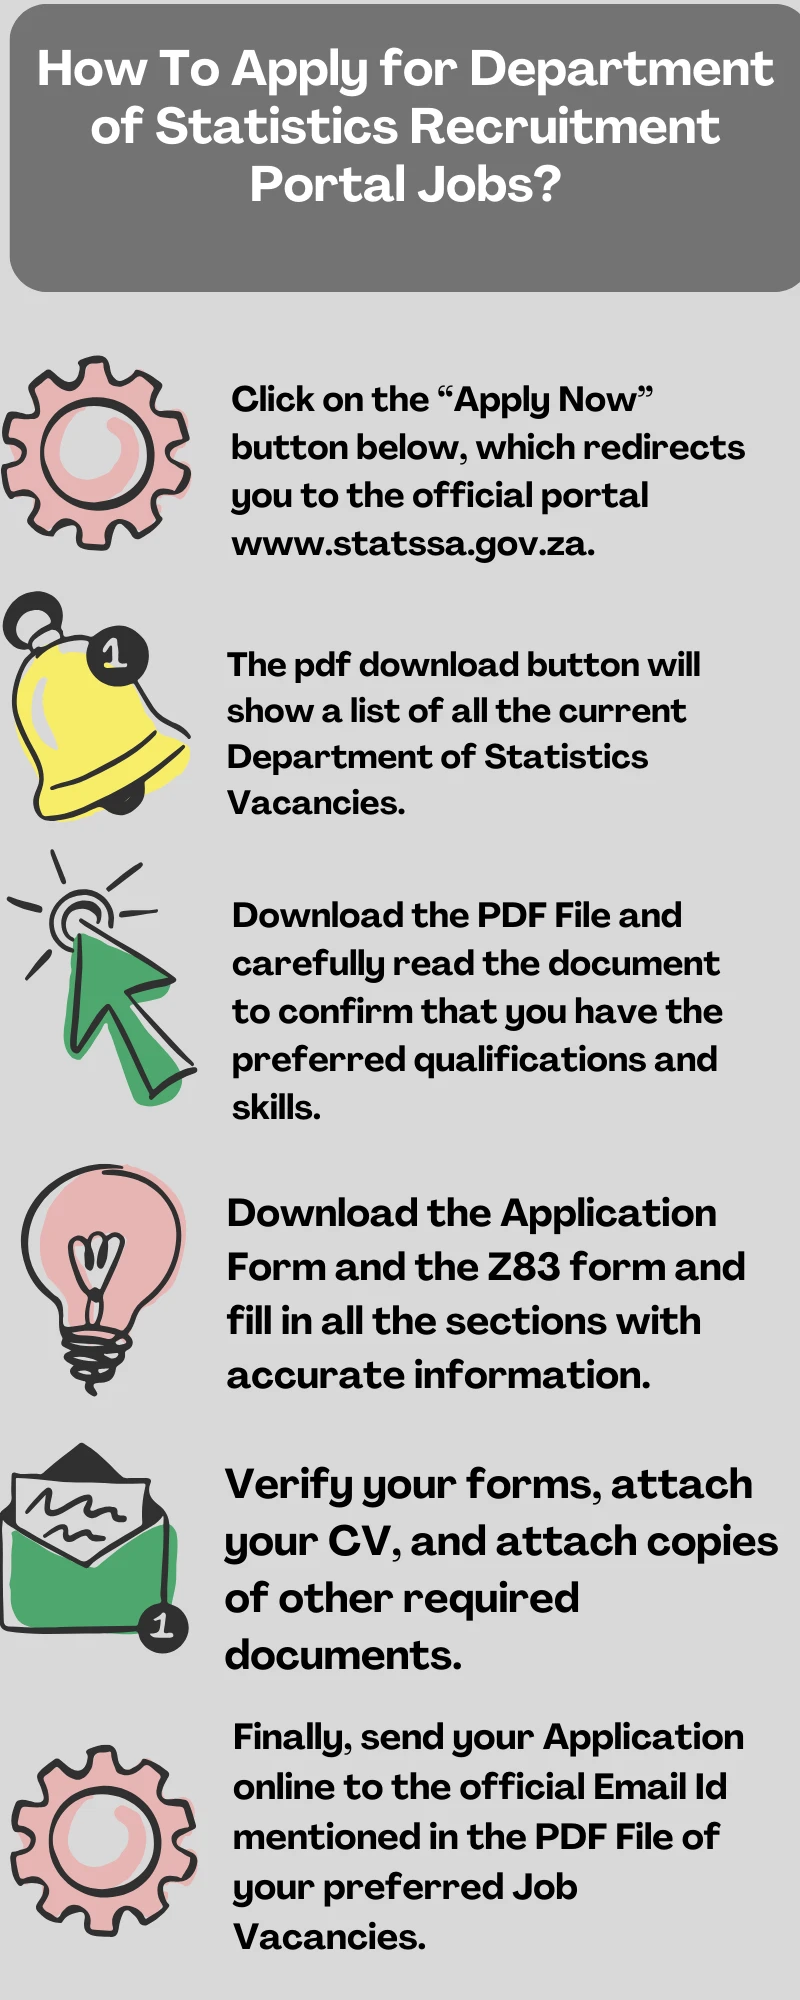 How To Apply for Department of Statistics Recruitment Portal Jobs?